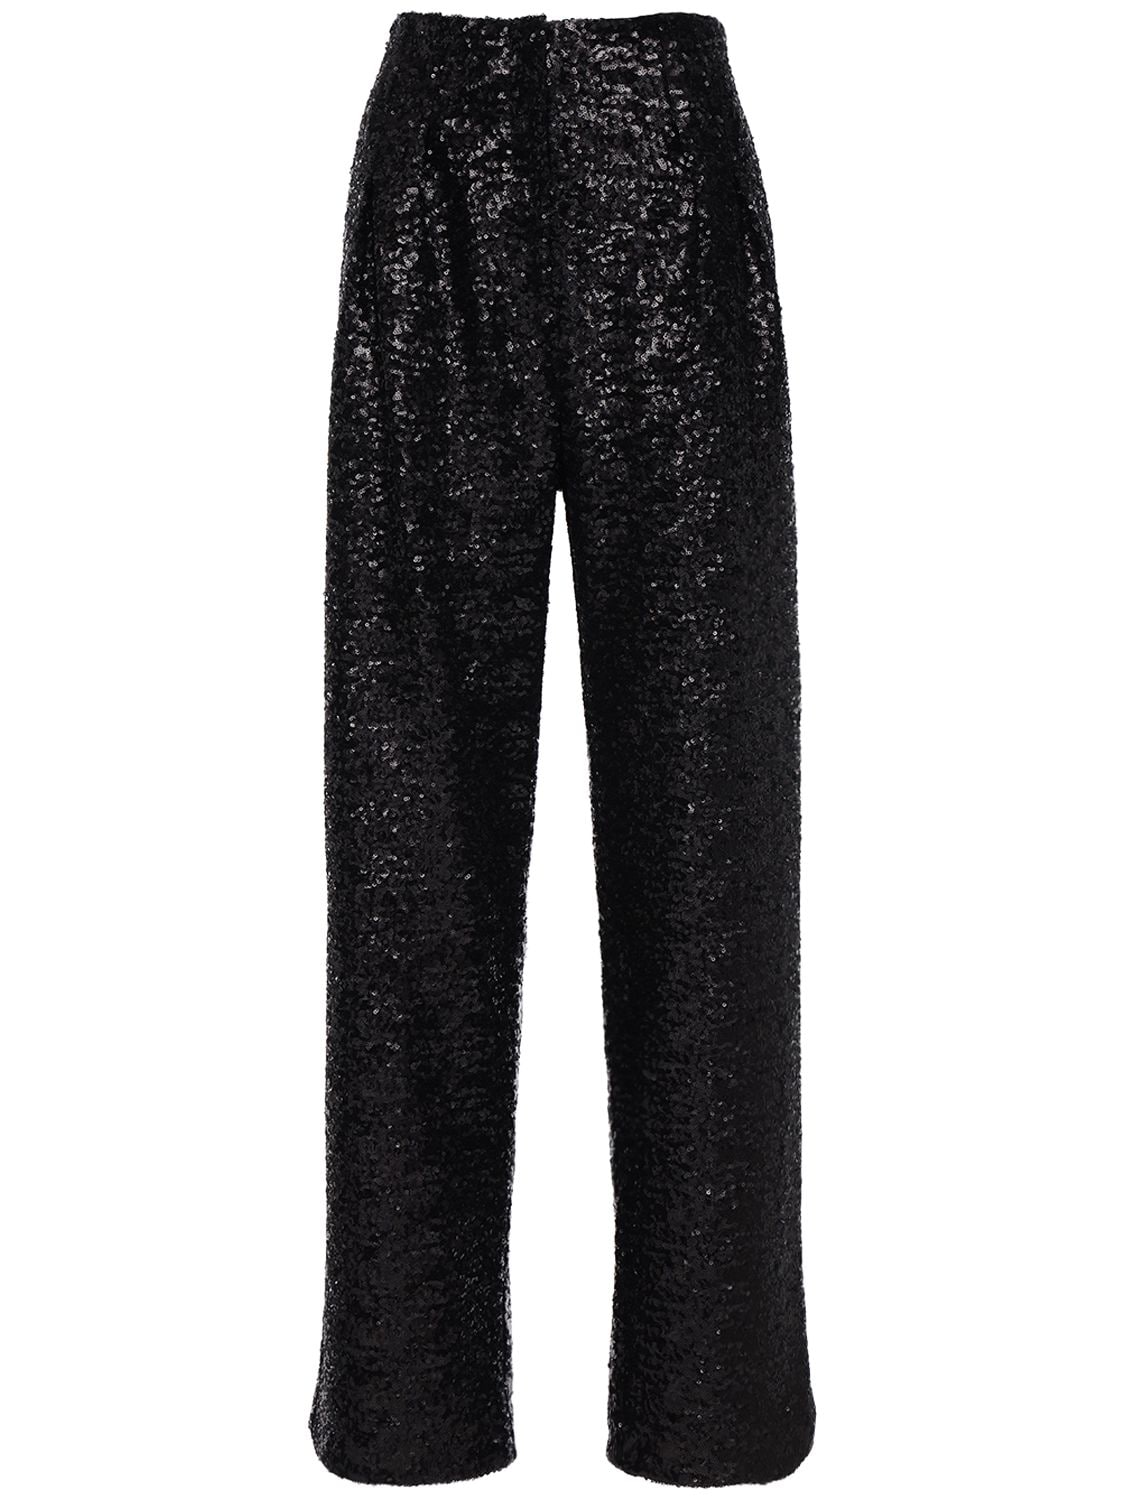 IN THE MOOD FOR LOVE CLYDE SEQUINED PANTS,72IXKL008-MDAWMQ2